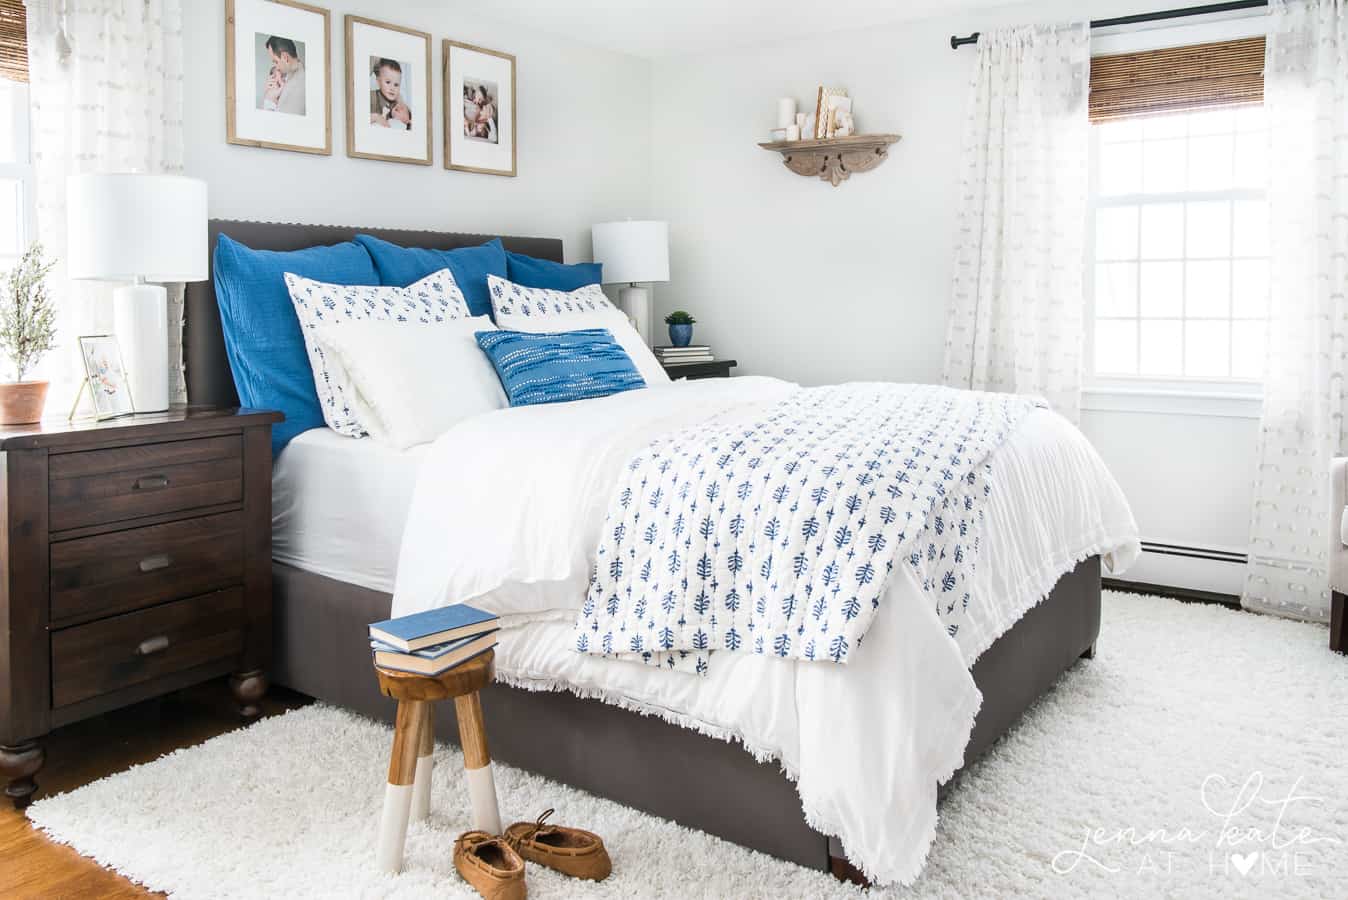 A bed with white sheets, a mix of pillows (solid blue, white and blue and white alone) and a quilted blue and white coverlet